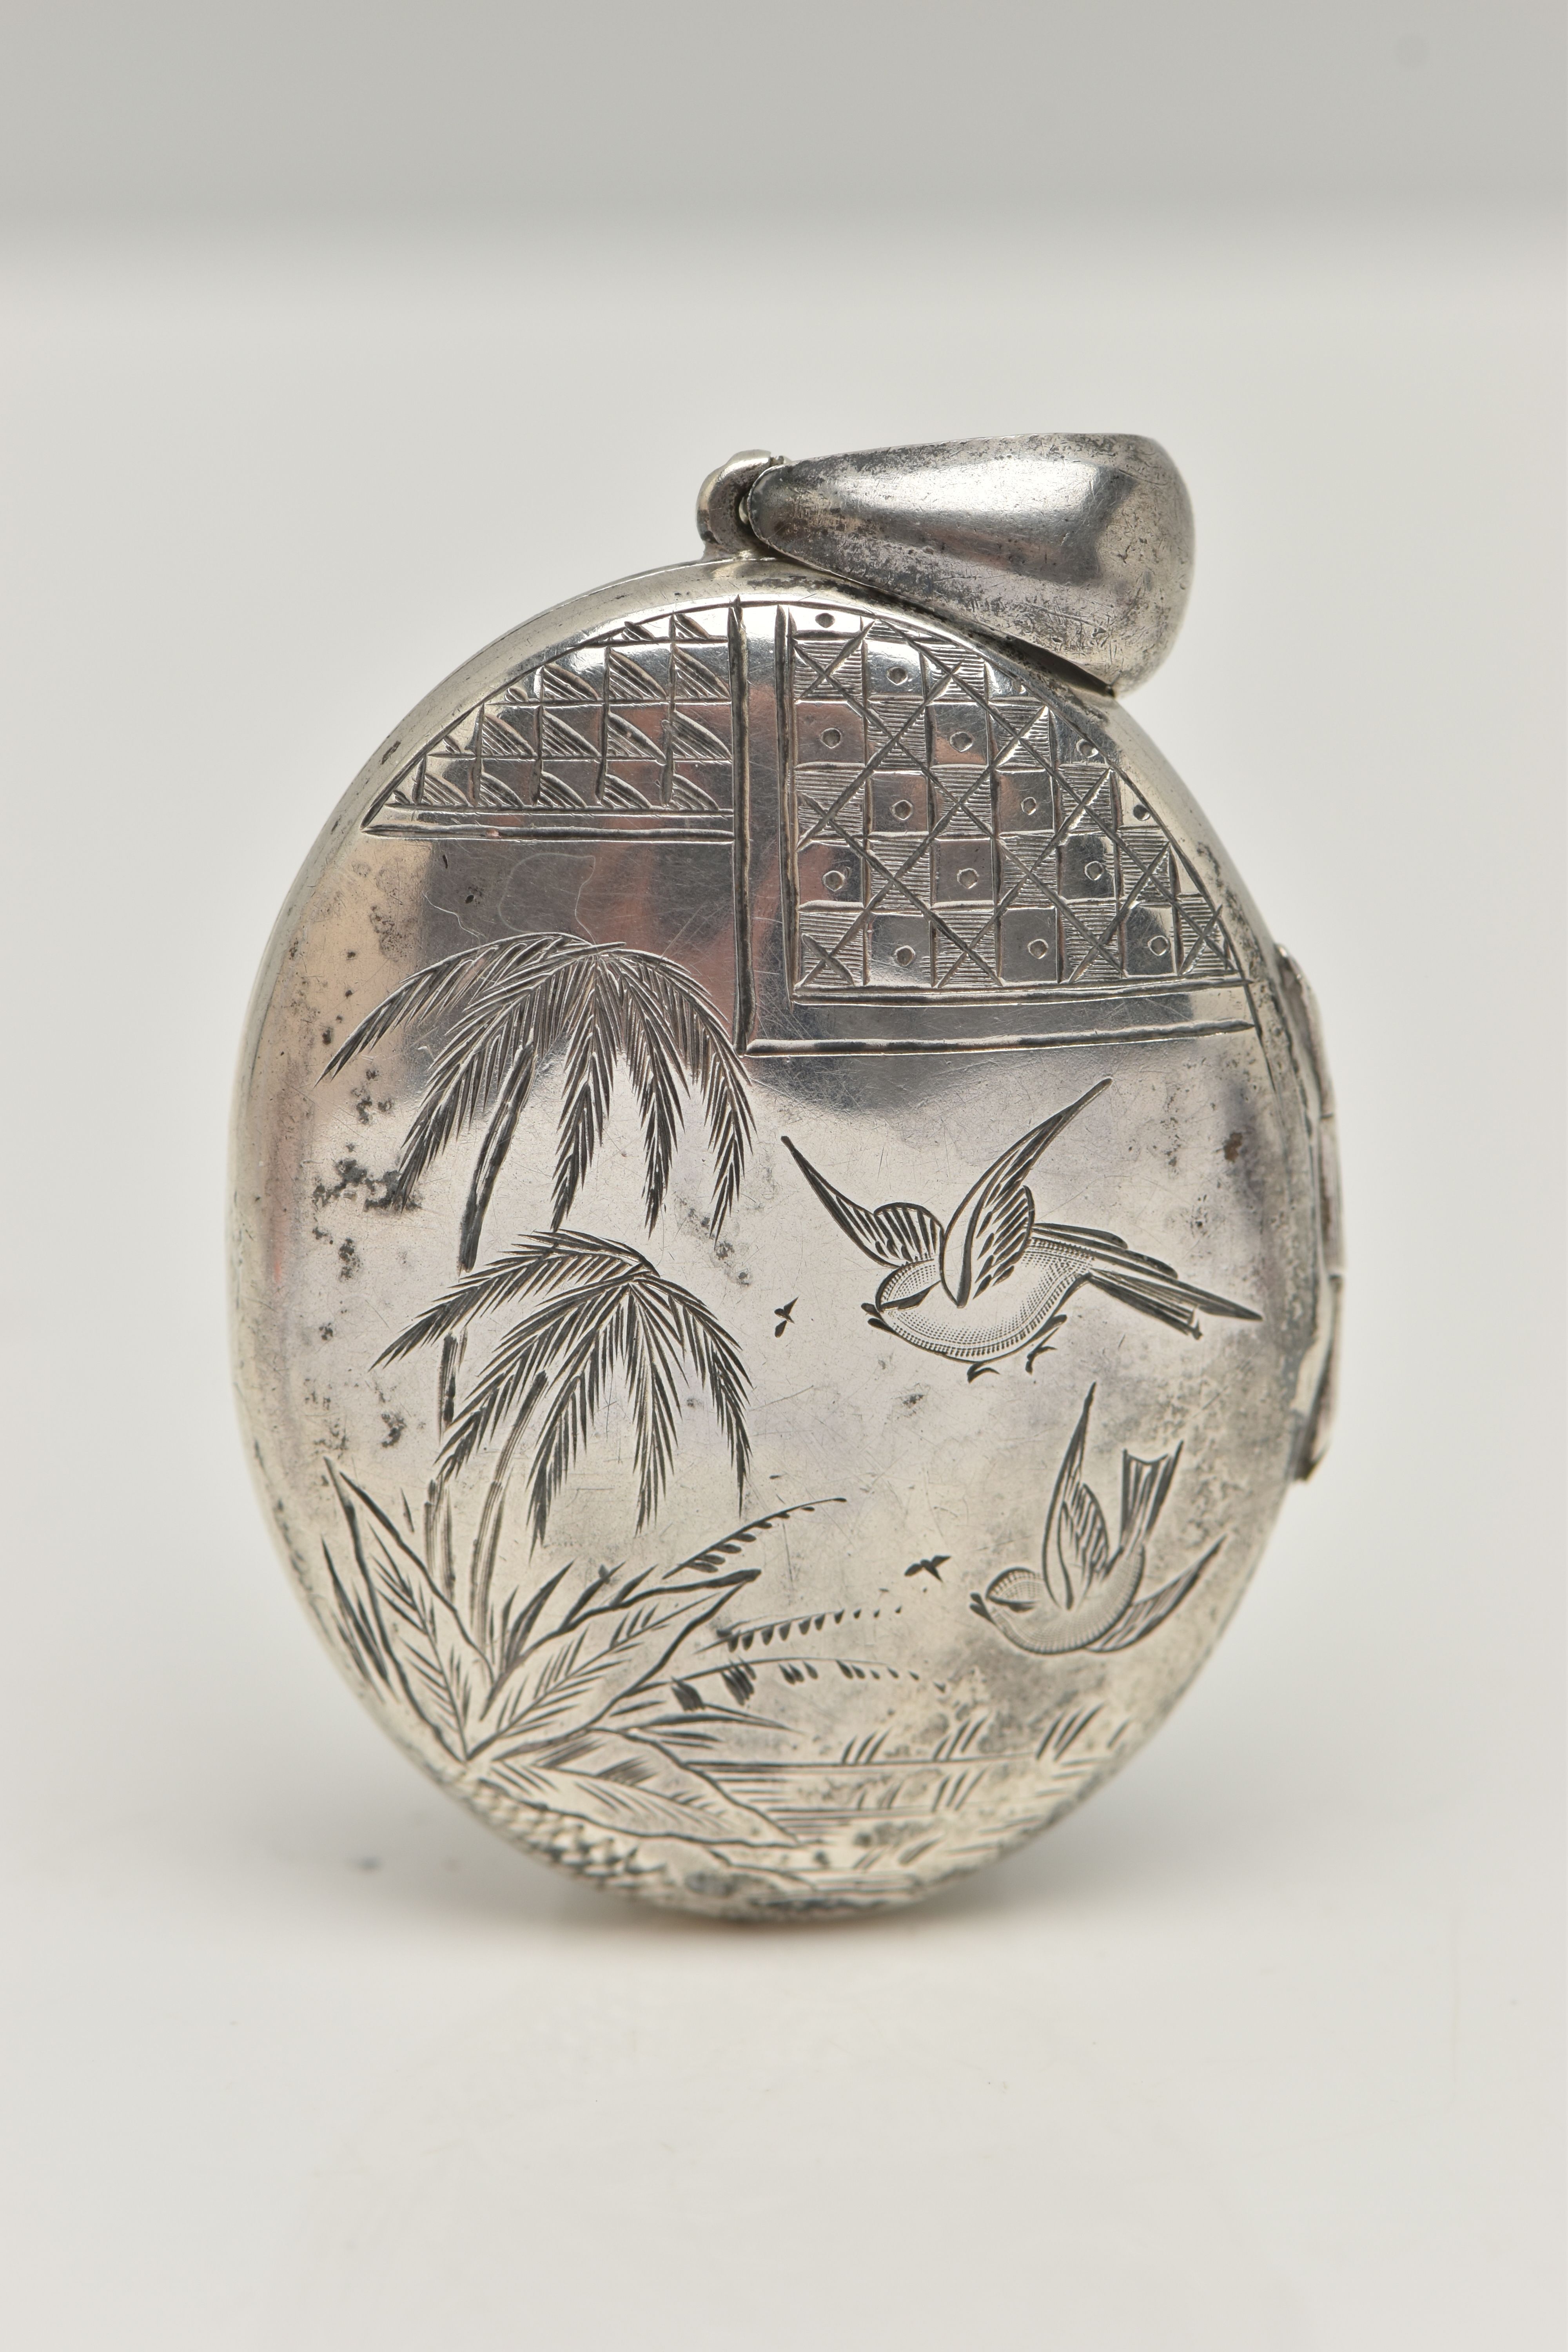 A VICTORIAN SILVER LOCKET, oval form locket with etch detail of palm trees and swallows, fitted with